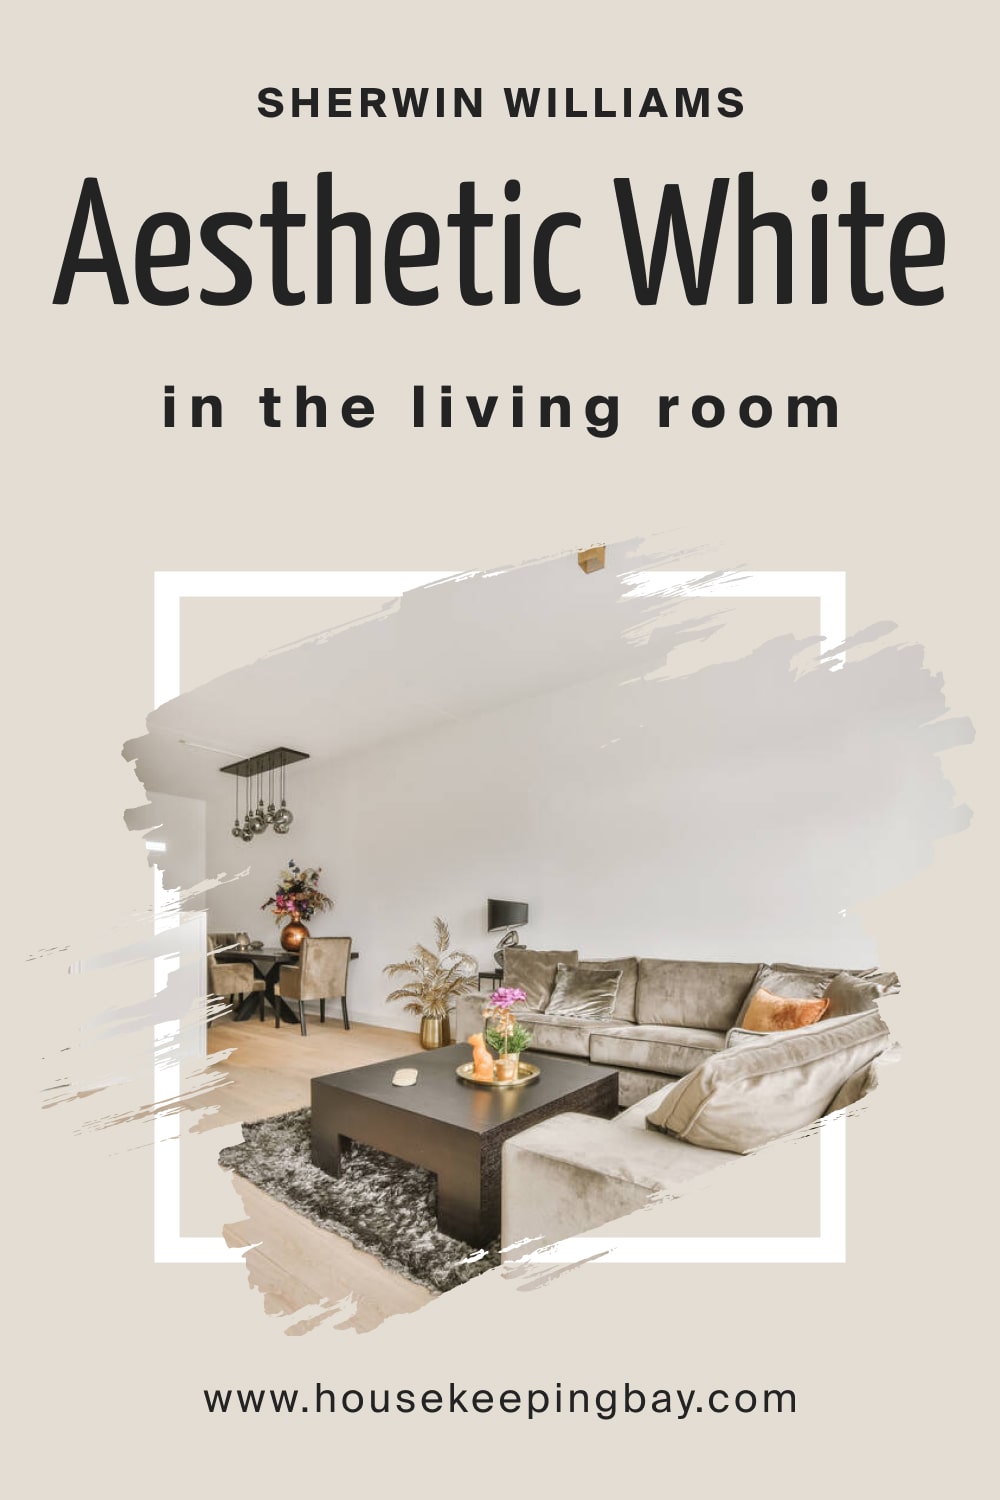 Sherwin Williams. Aesthetic White SW 7035 In the Living Room